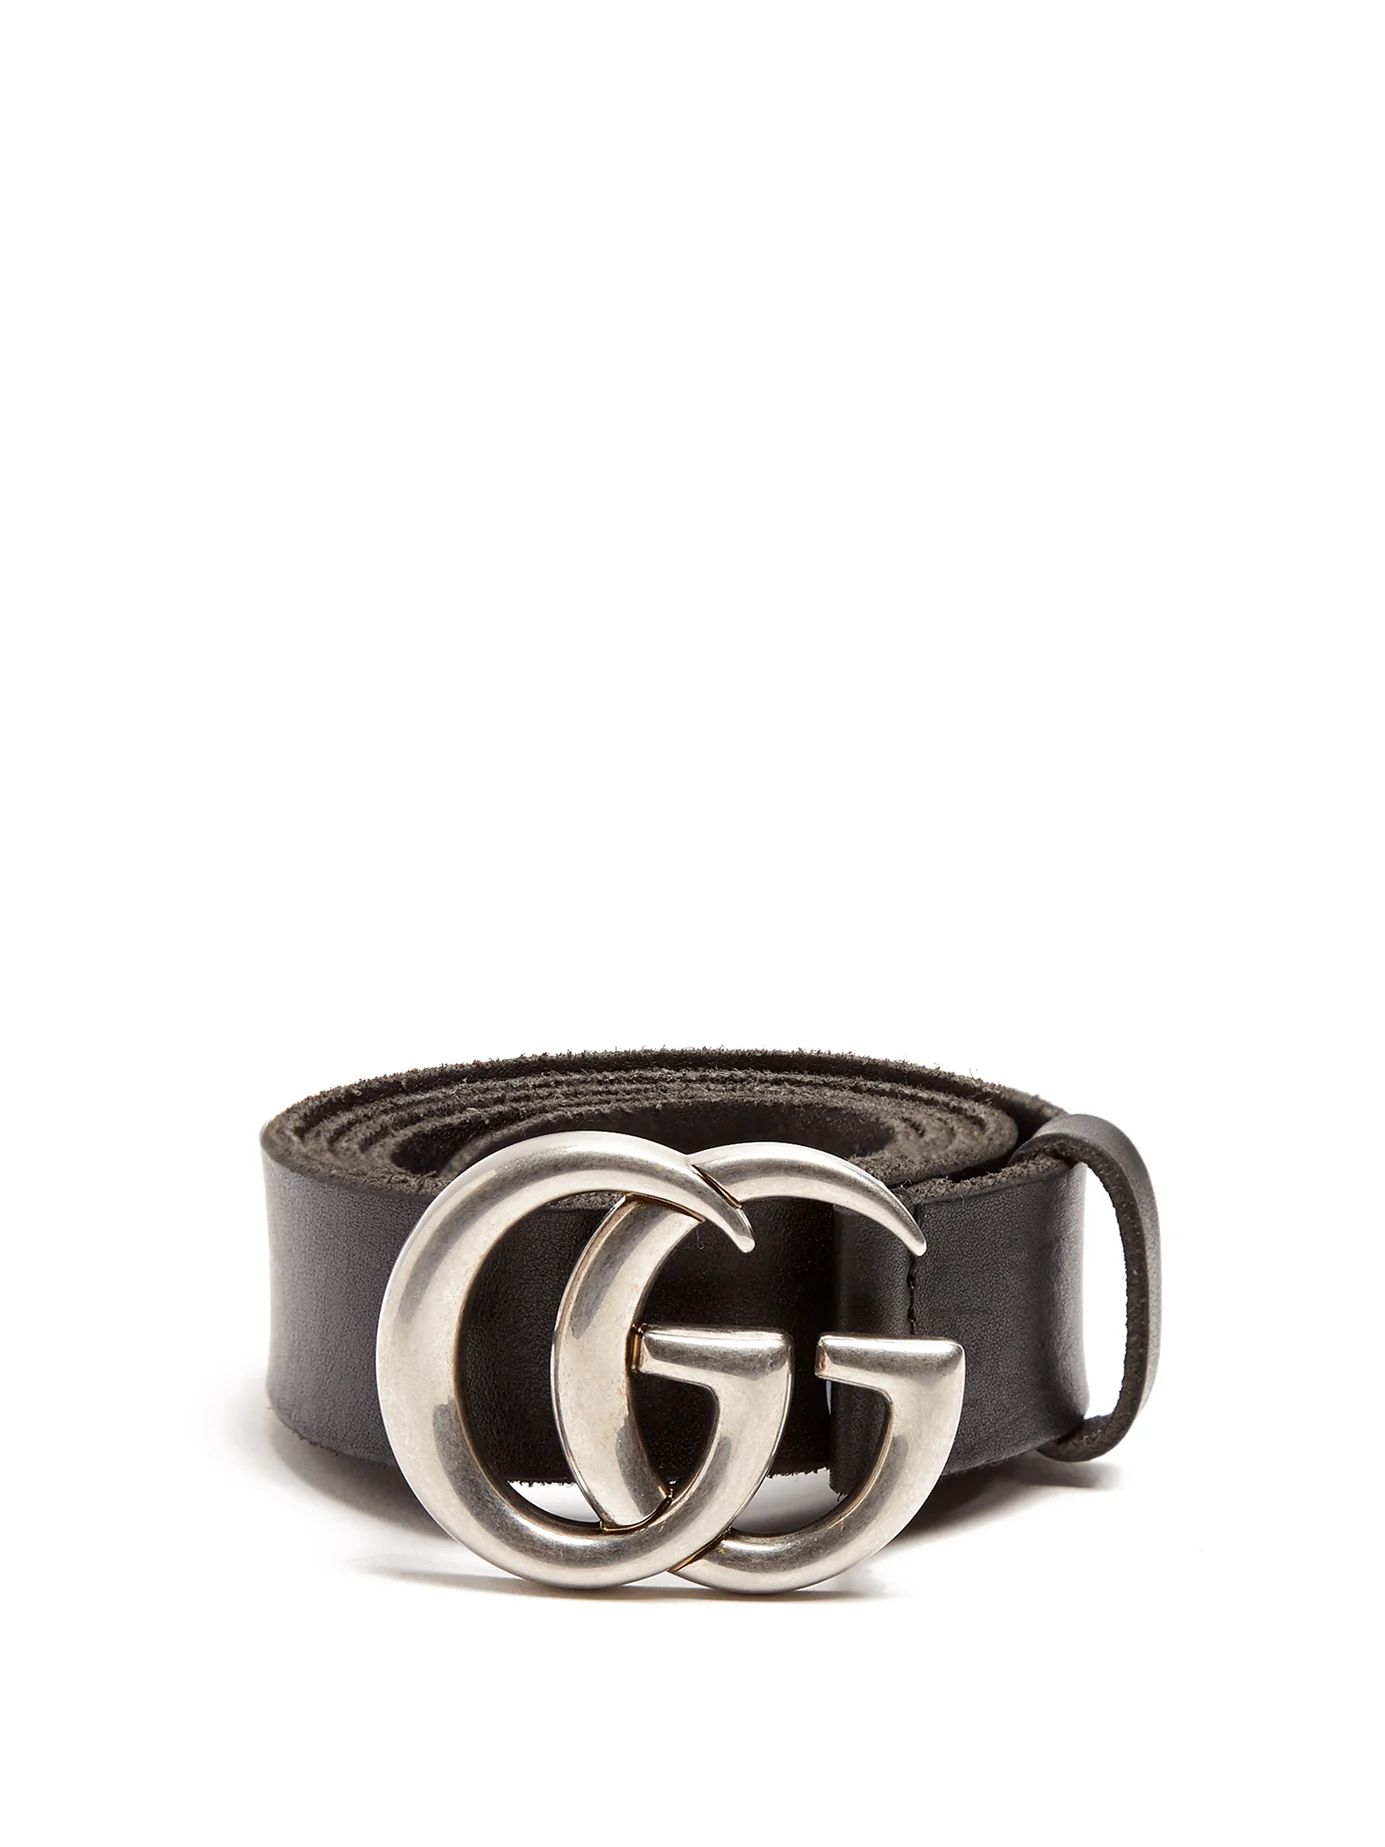 GG Marmont leather belt | Matches (US)